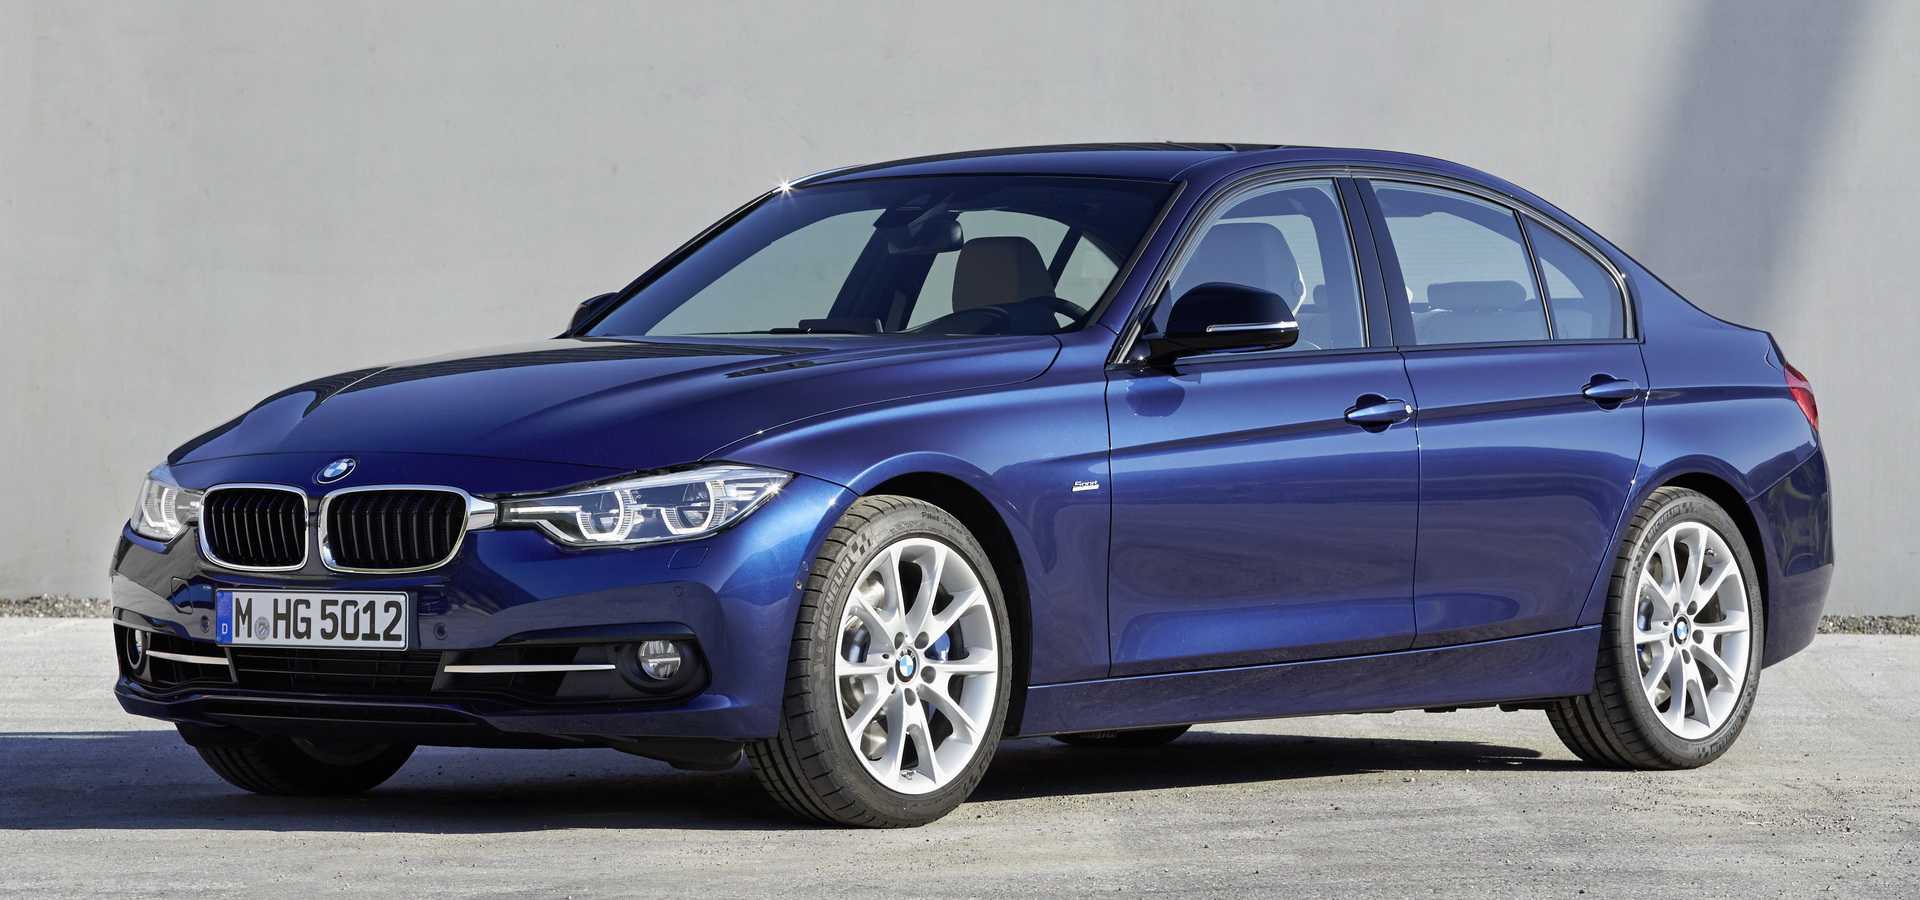 Bmw 3 series touring review | auto express